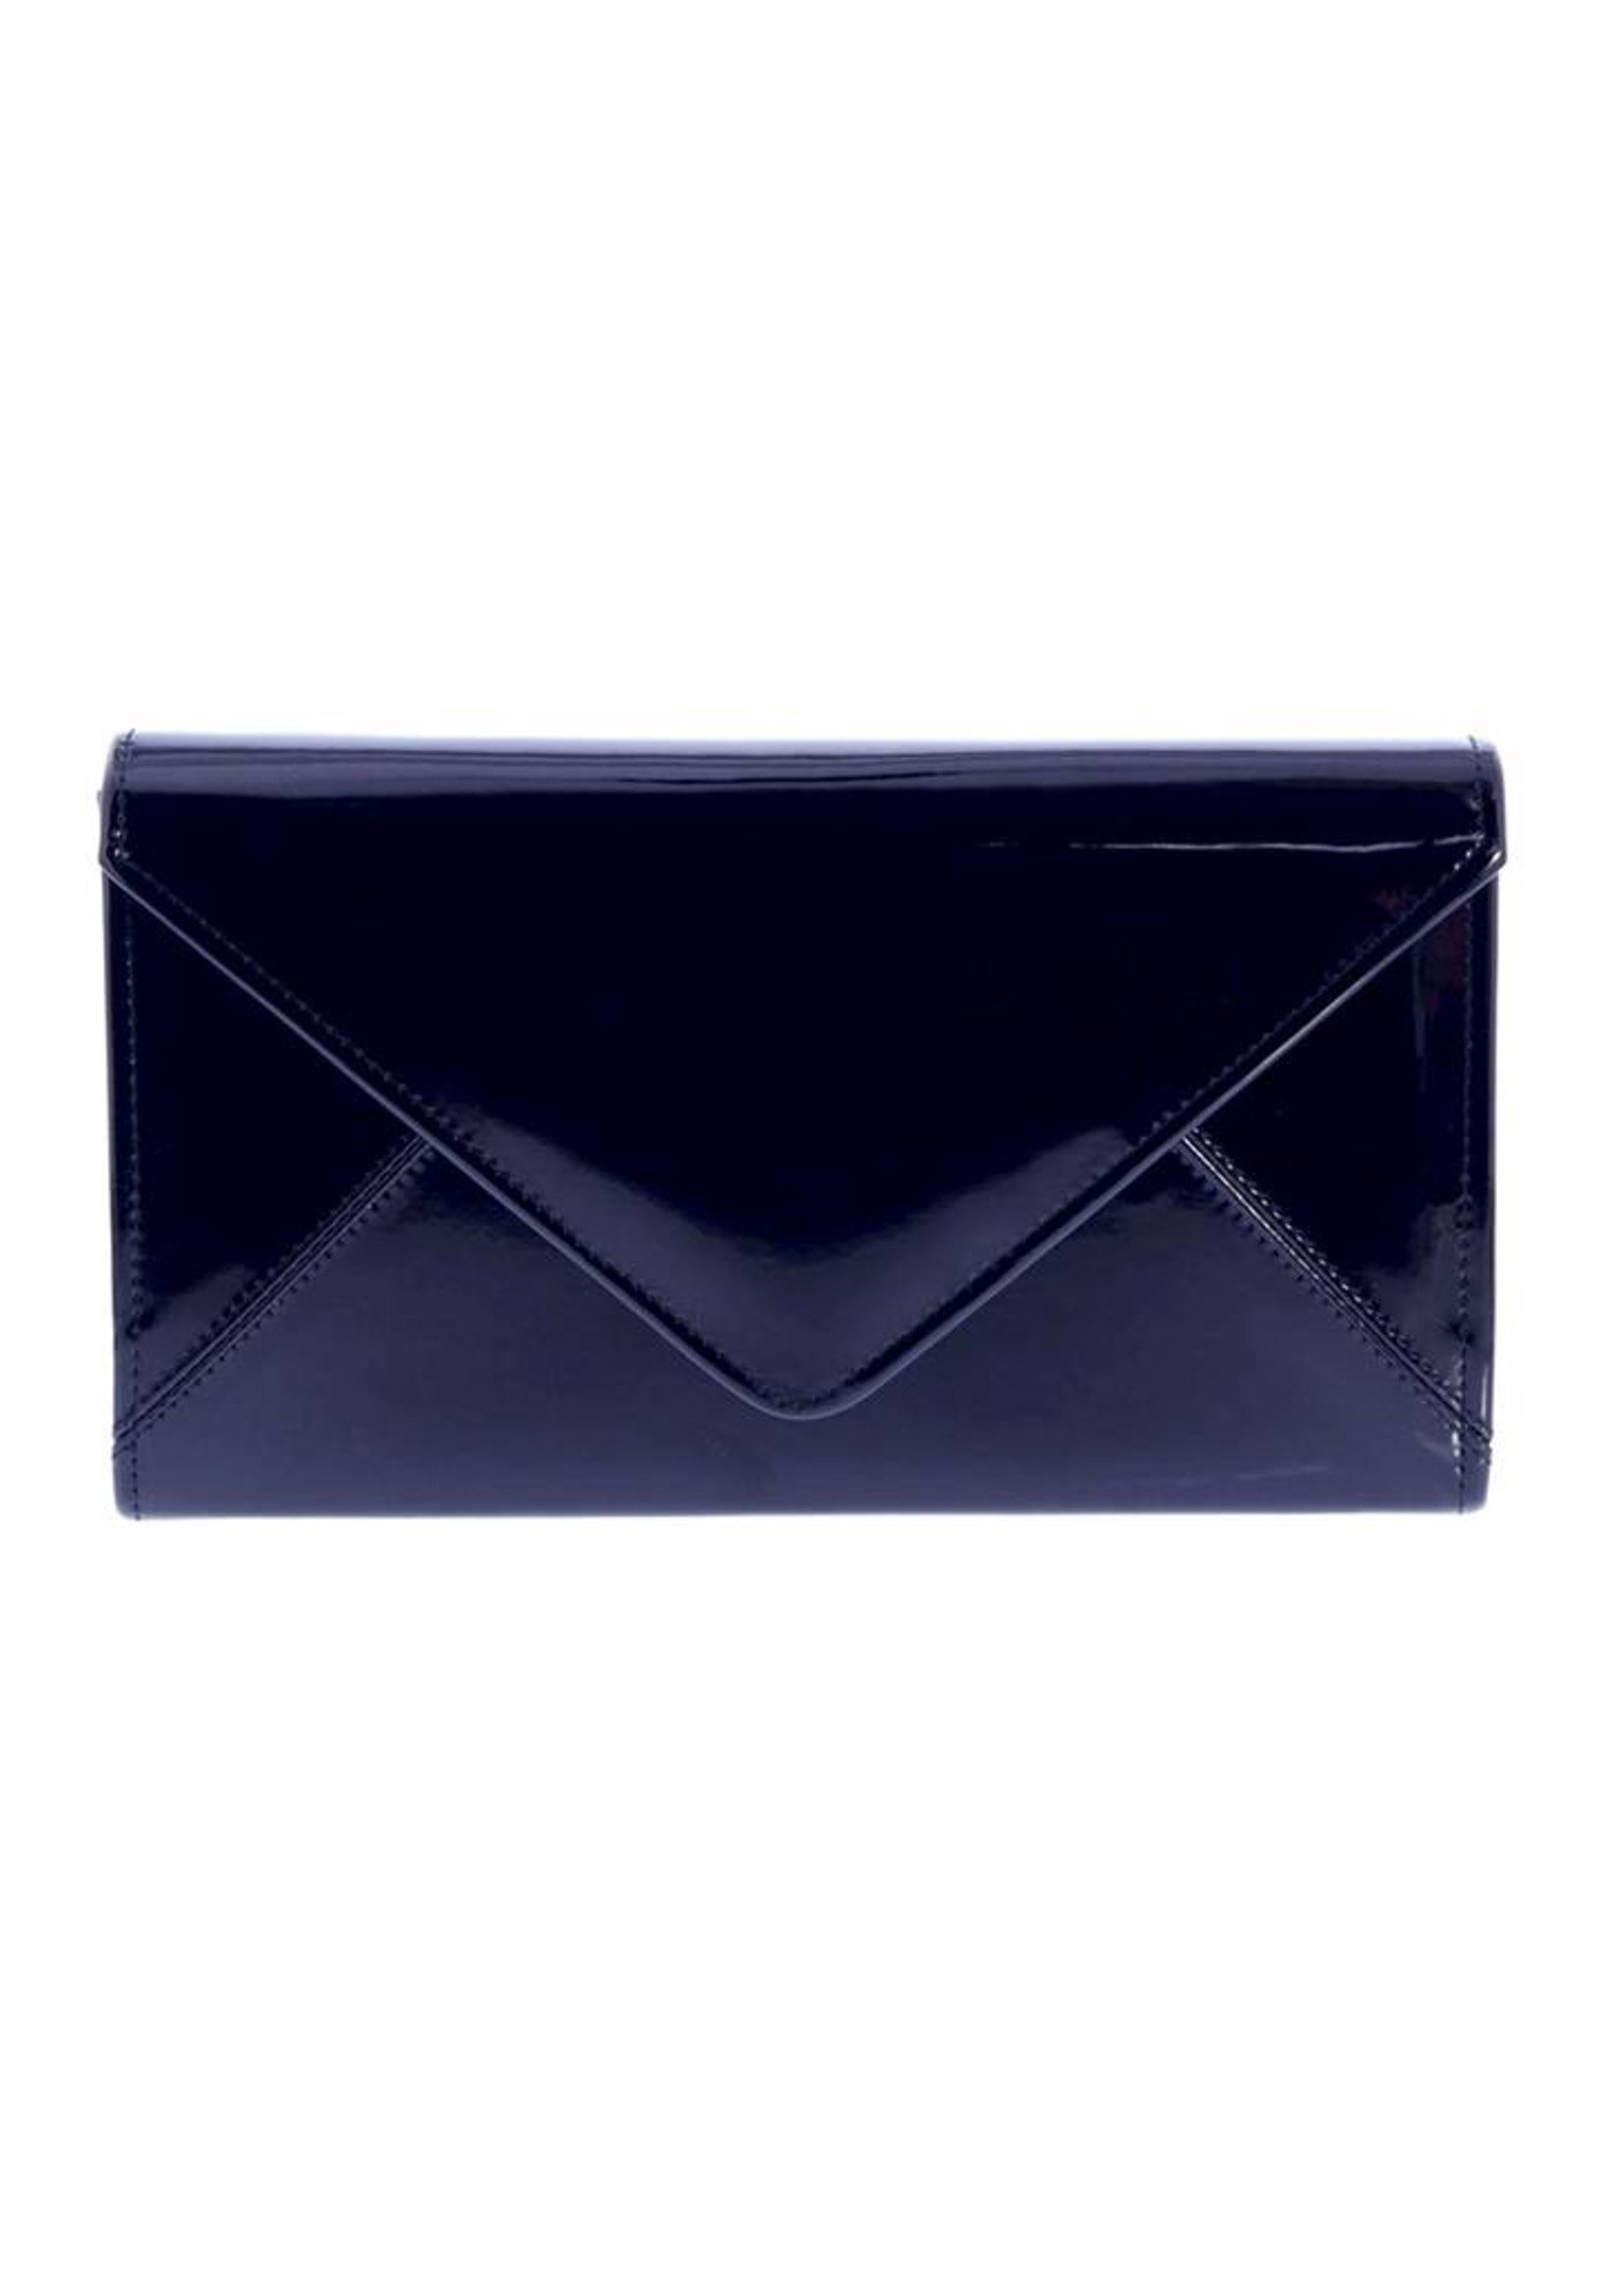 Gabee Products Keeley Patent Envelope Clutch